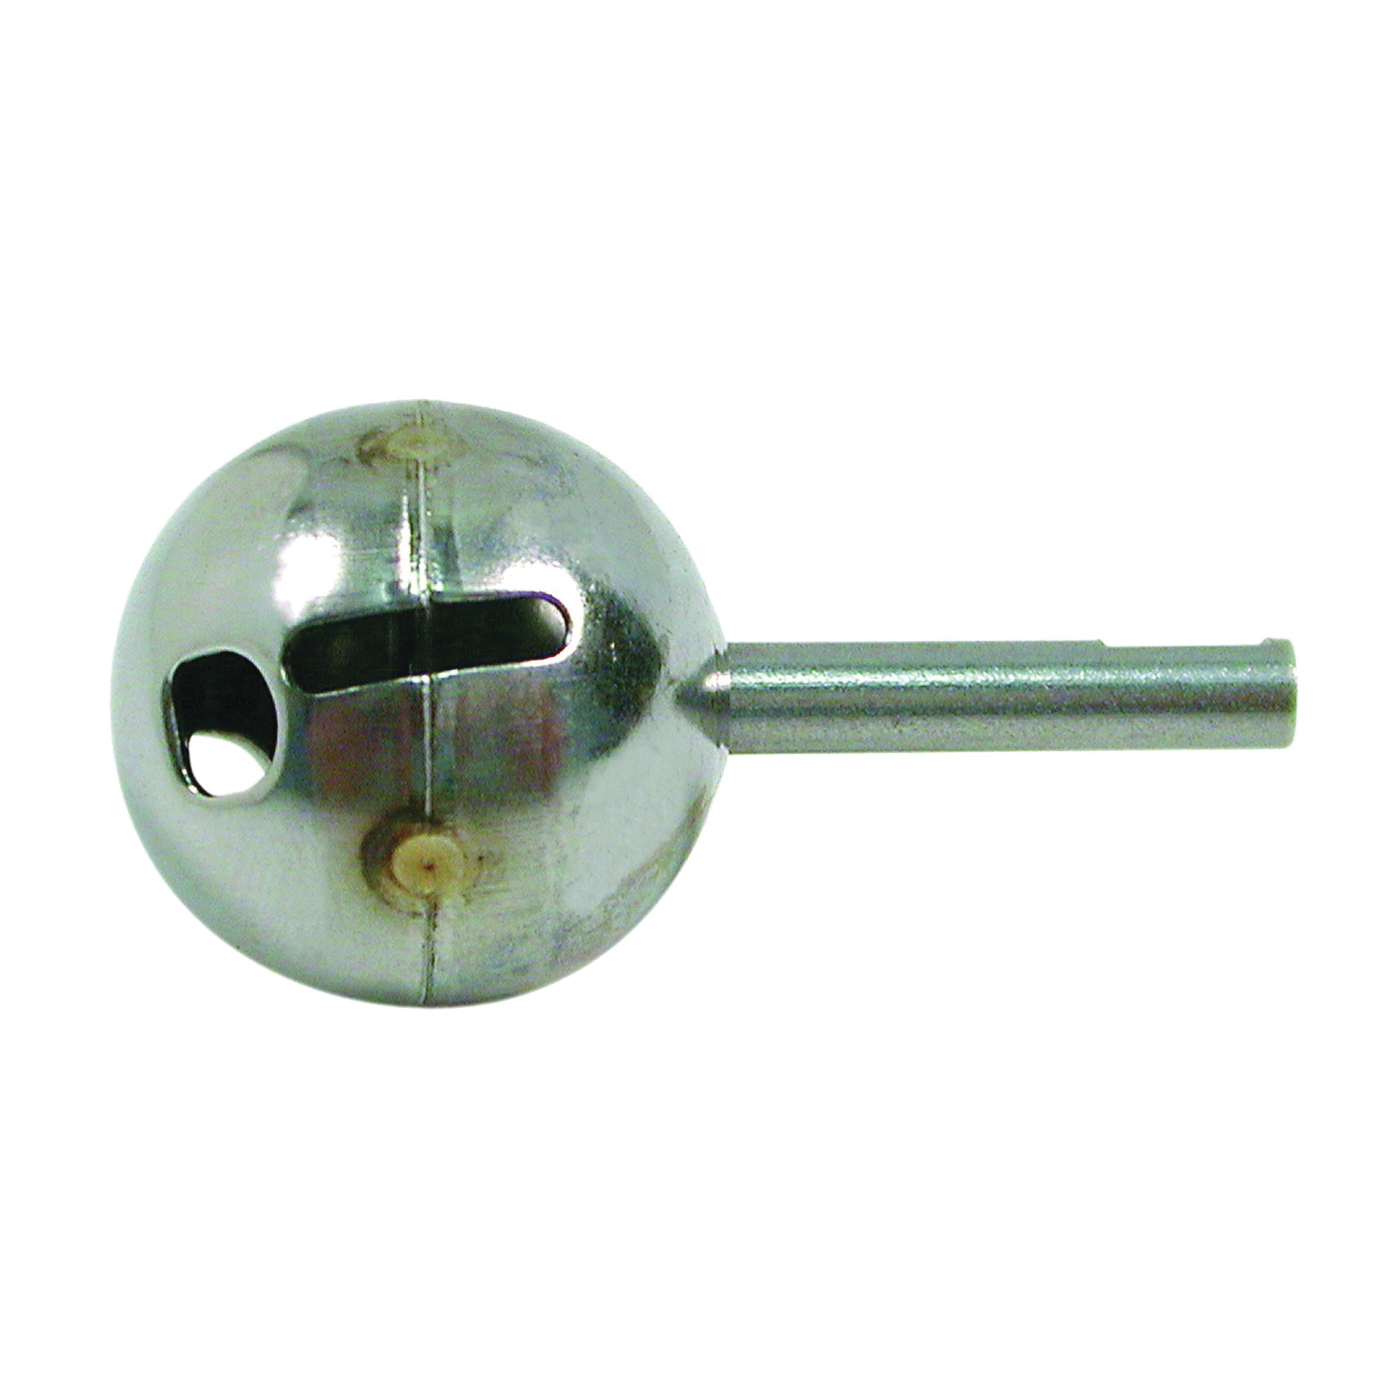 DL-18 Series 88119 Faucet Ball Assembly, Stainless Steel